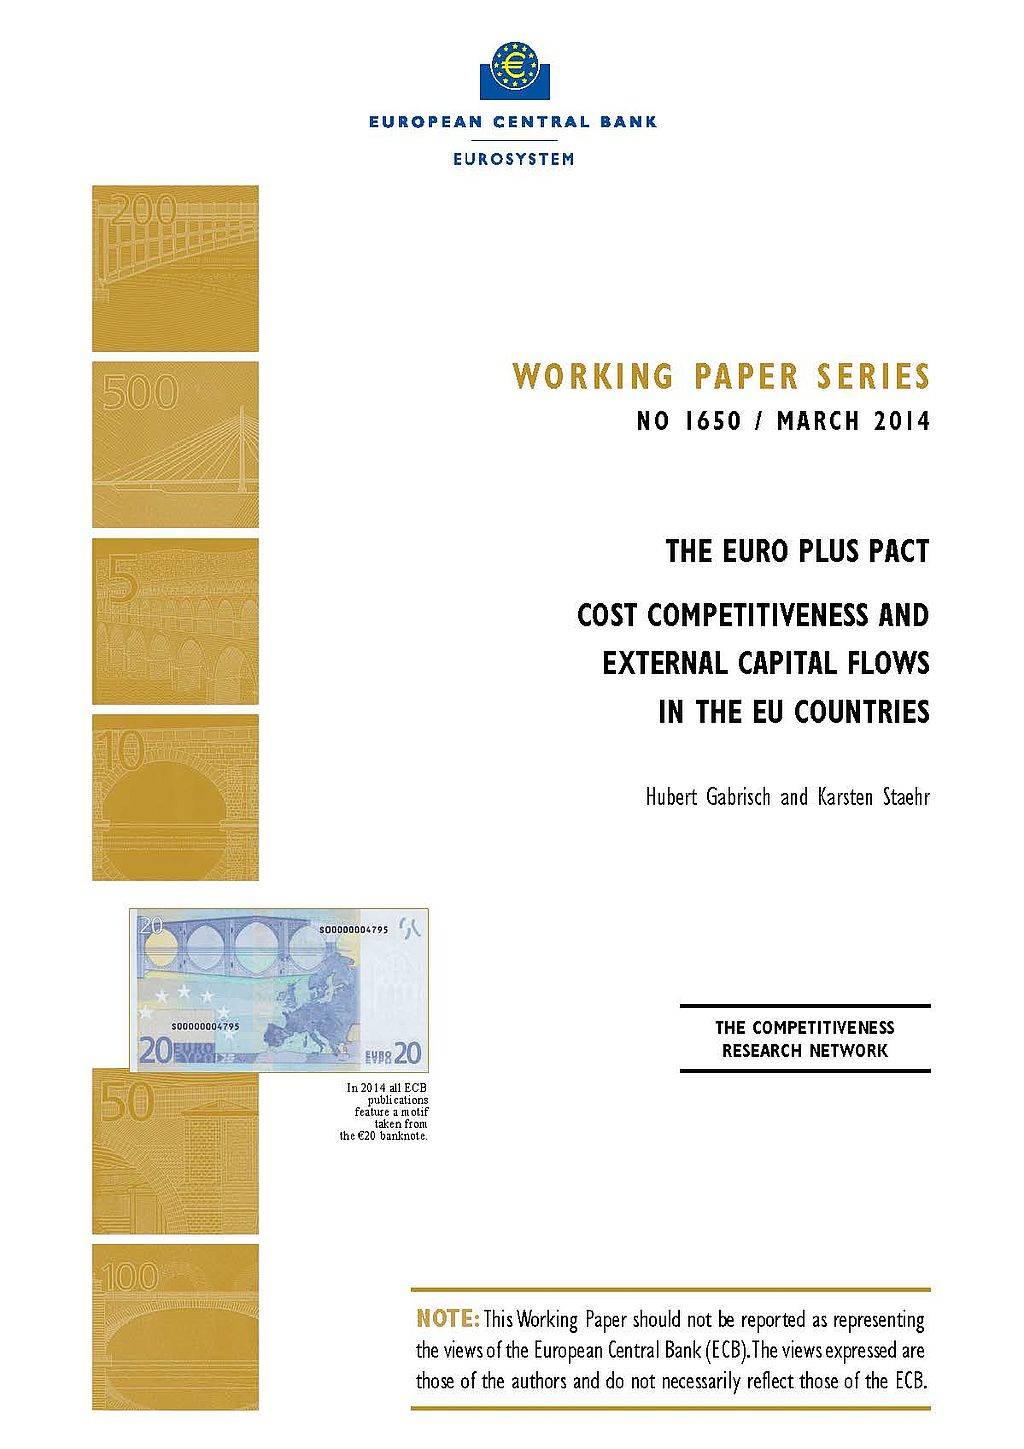 cover_ECB-Working-Paper-Series_2014-march-1650.jpg